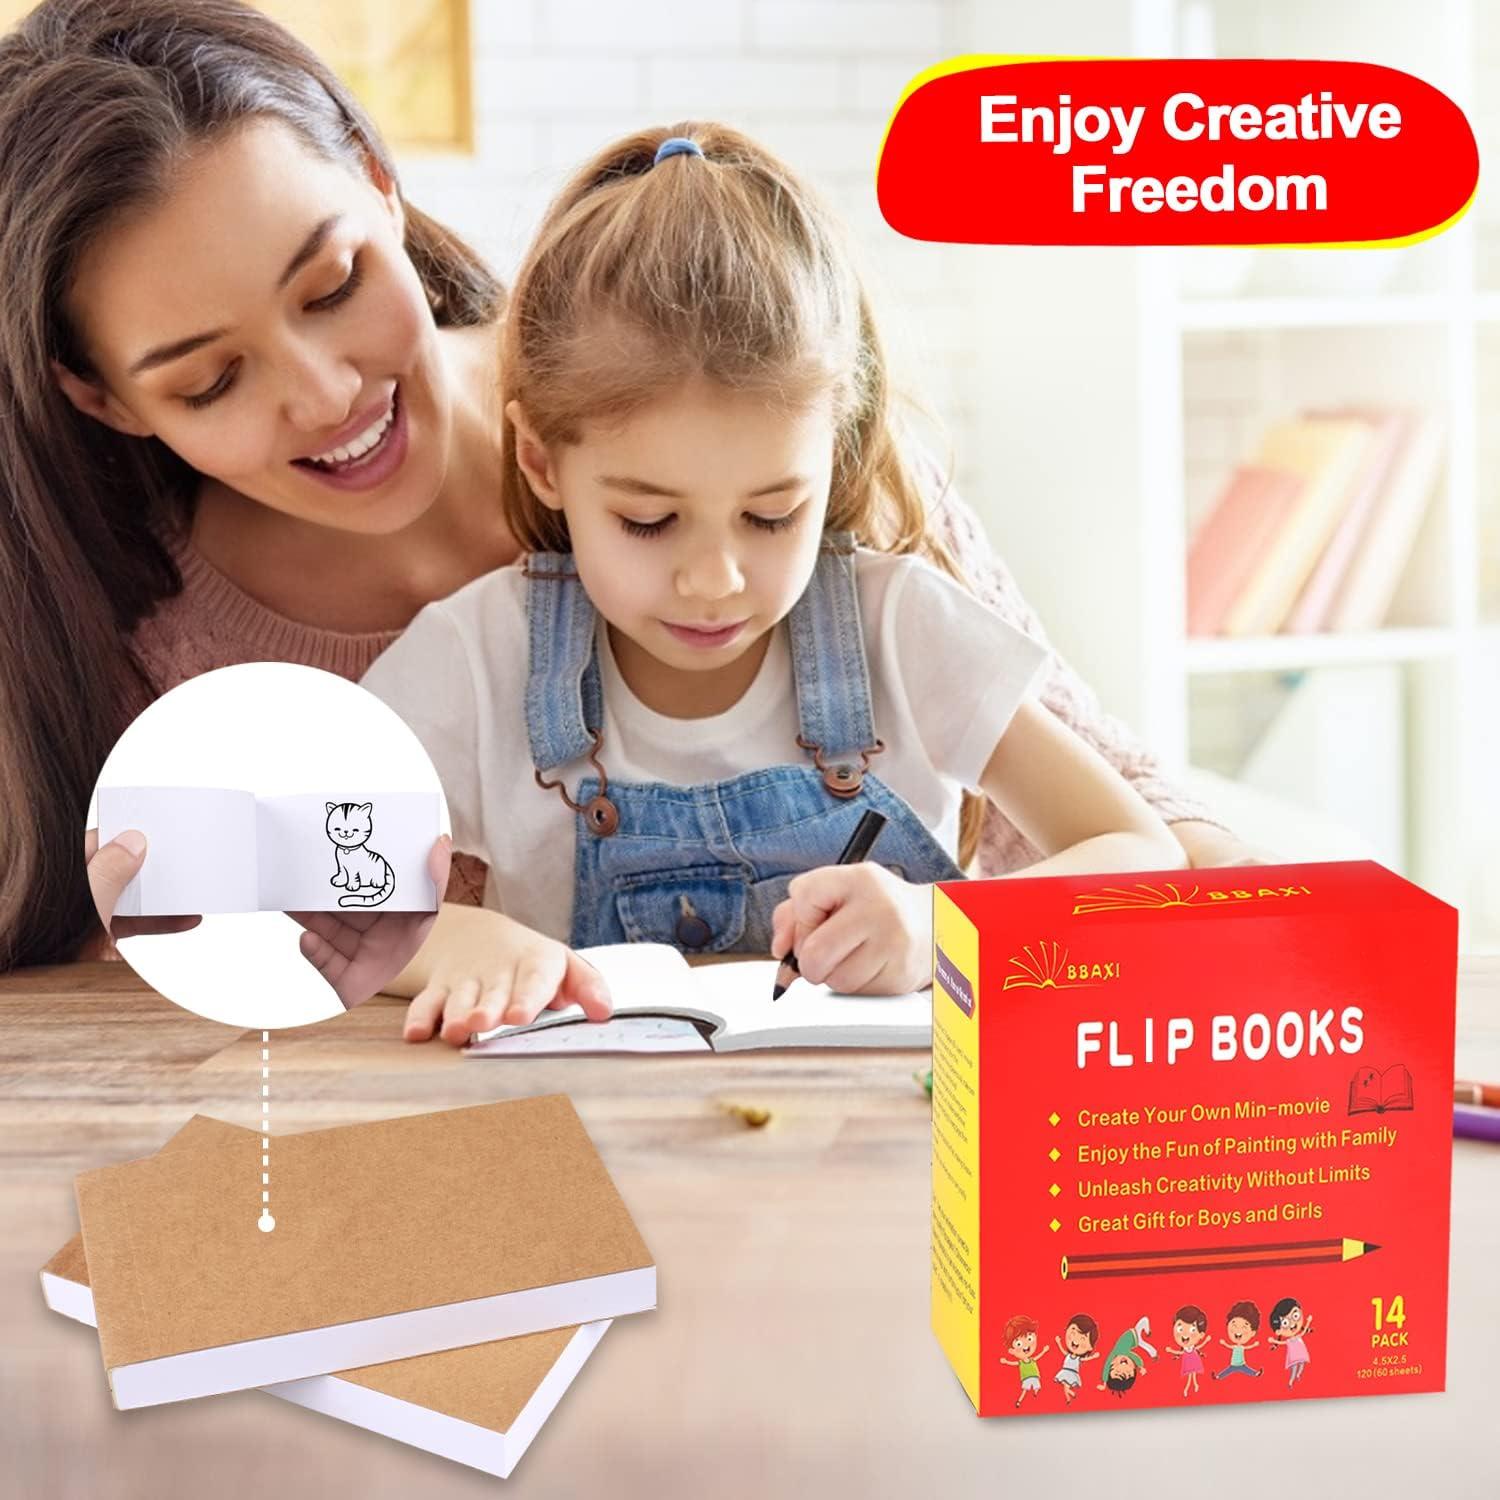 14 Pack Blank Flipbooks, 840 Sheets (1680 Pages) Flip Book Paper for  Animation, Sketching and Cartoon Creation, 120GSM No Bleed Drawing Paper  and Sewn Binding (4.5 x 2.5)